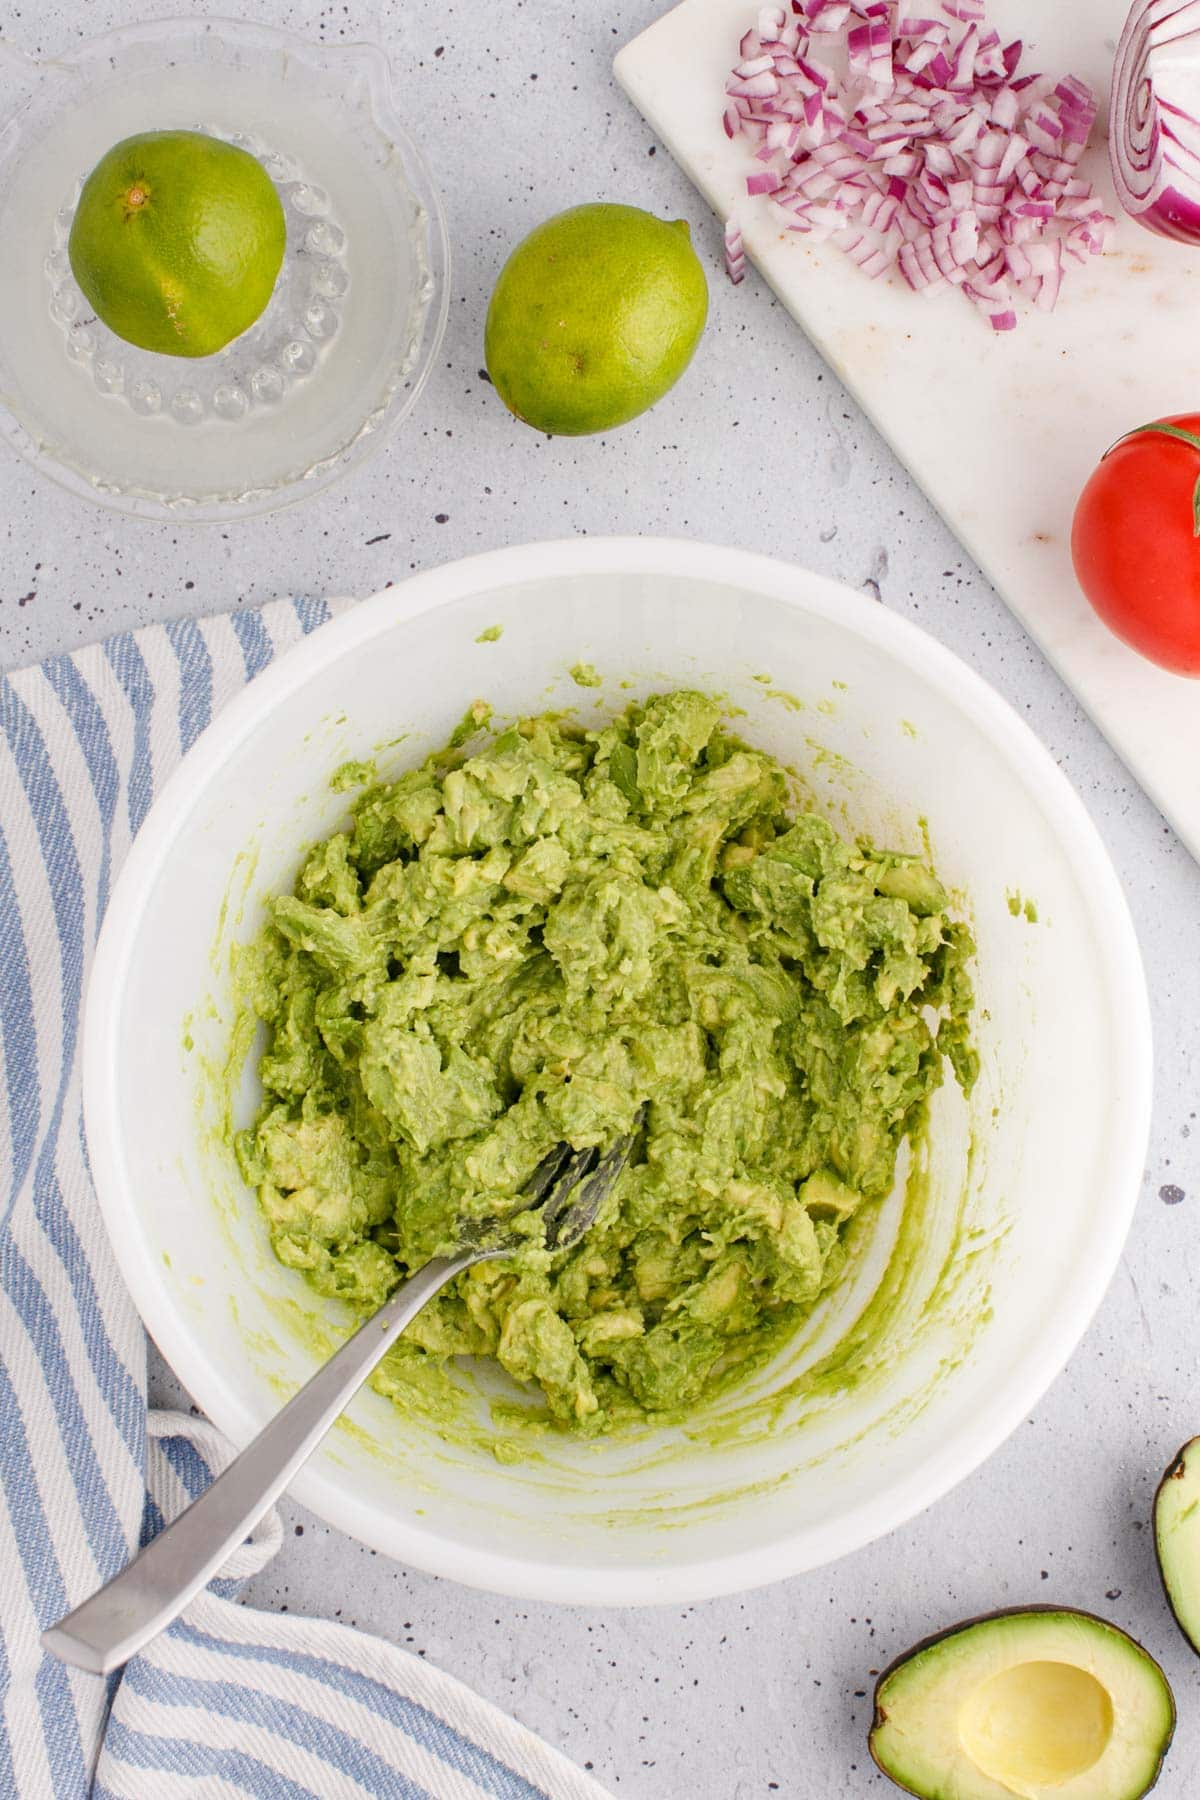 Bowl of mashed avocado with a fork.